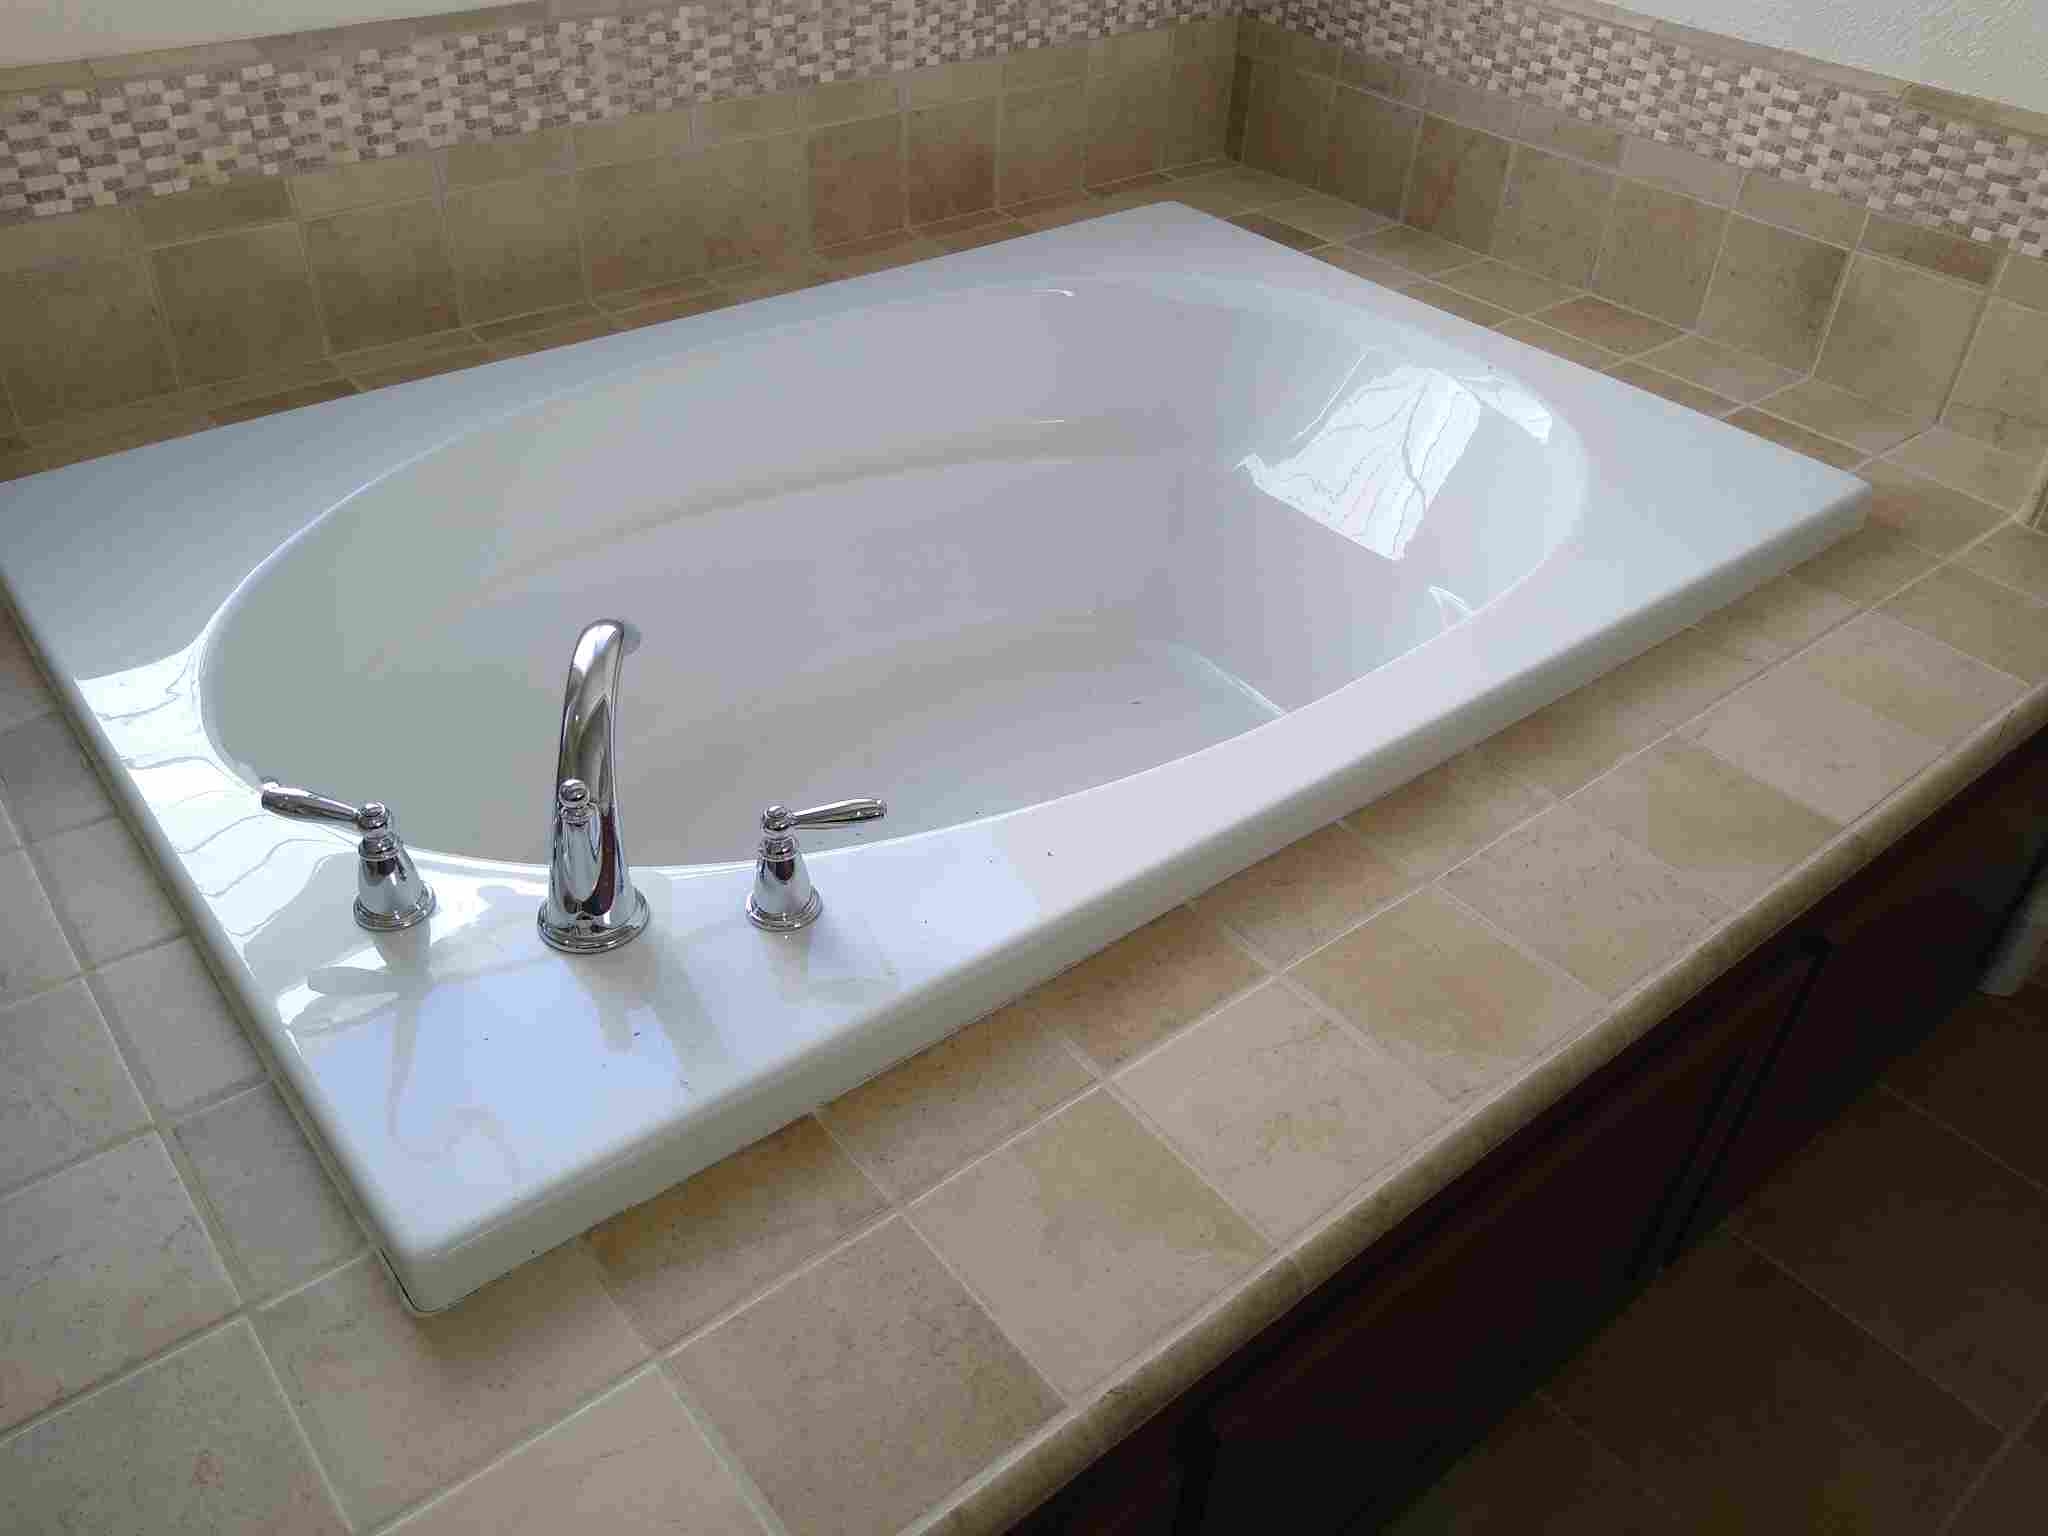 Grouted tub